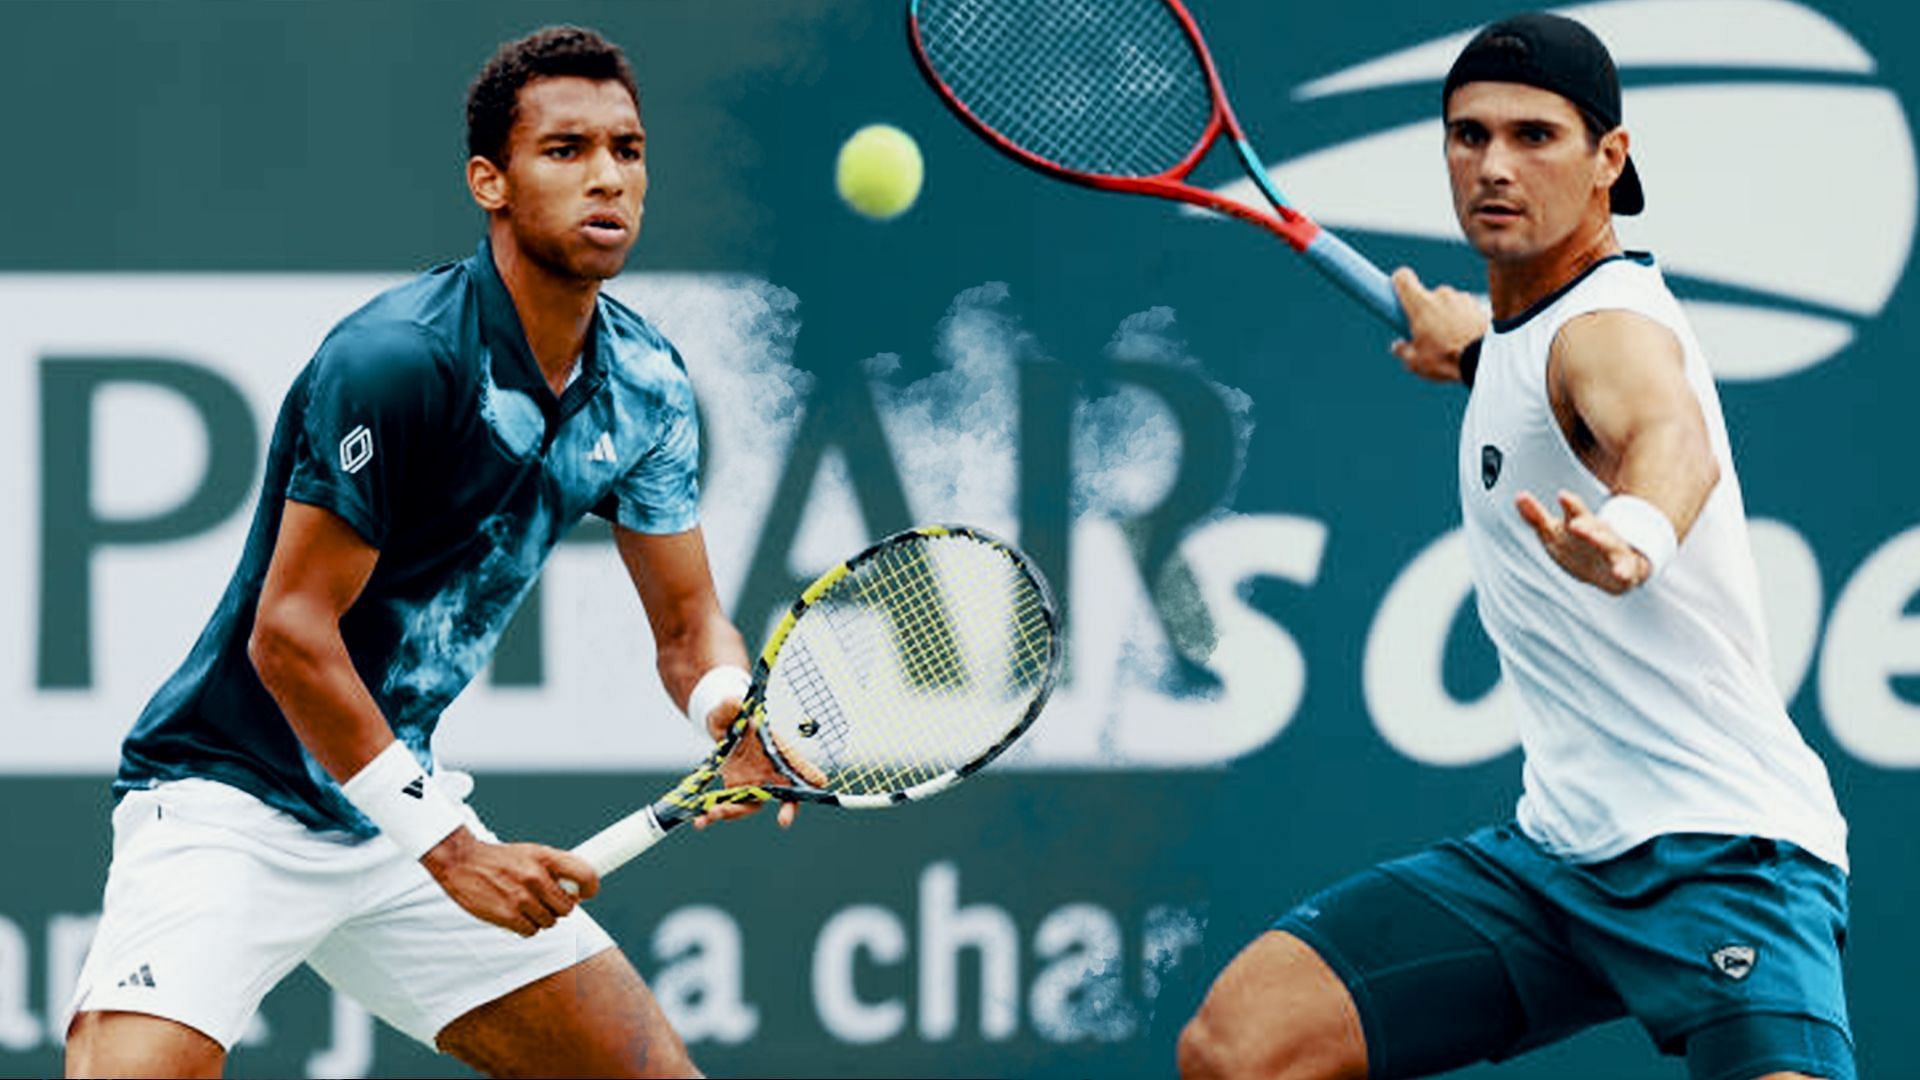 Felix Auger-ALiassime vs Marcos Giron is one of the quarterfinals at the Japan Open